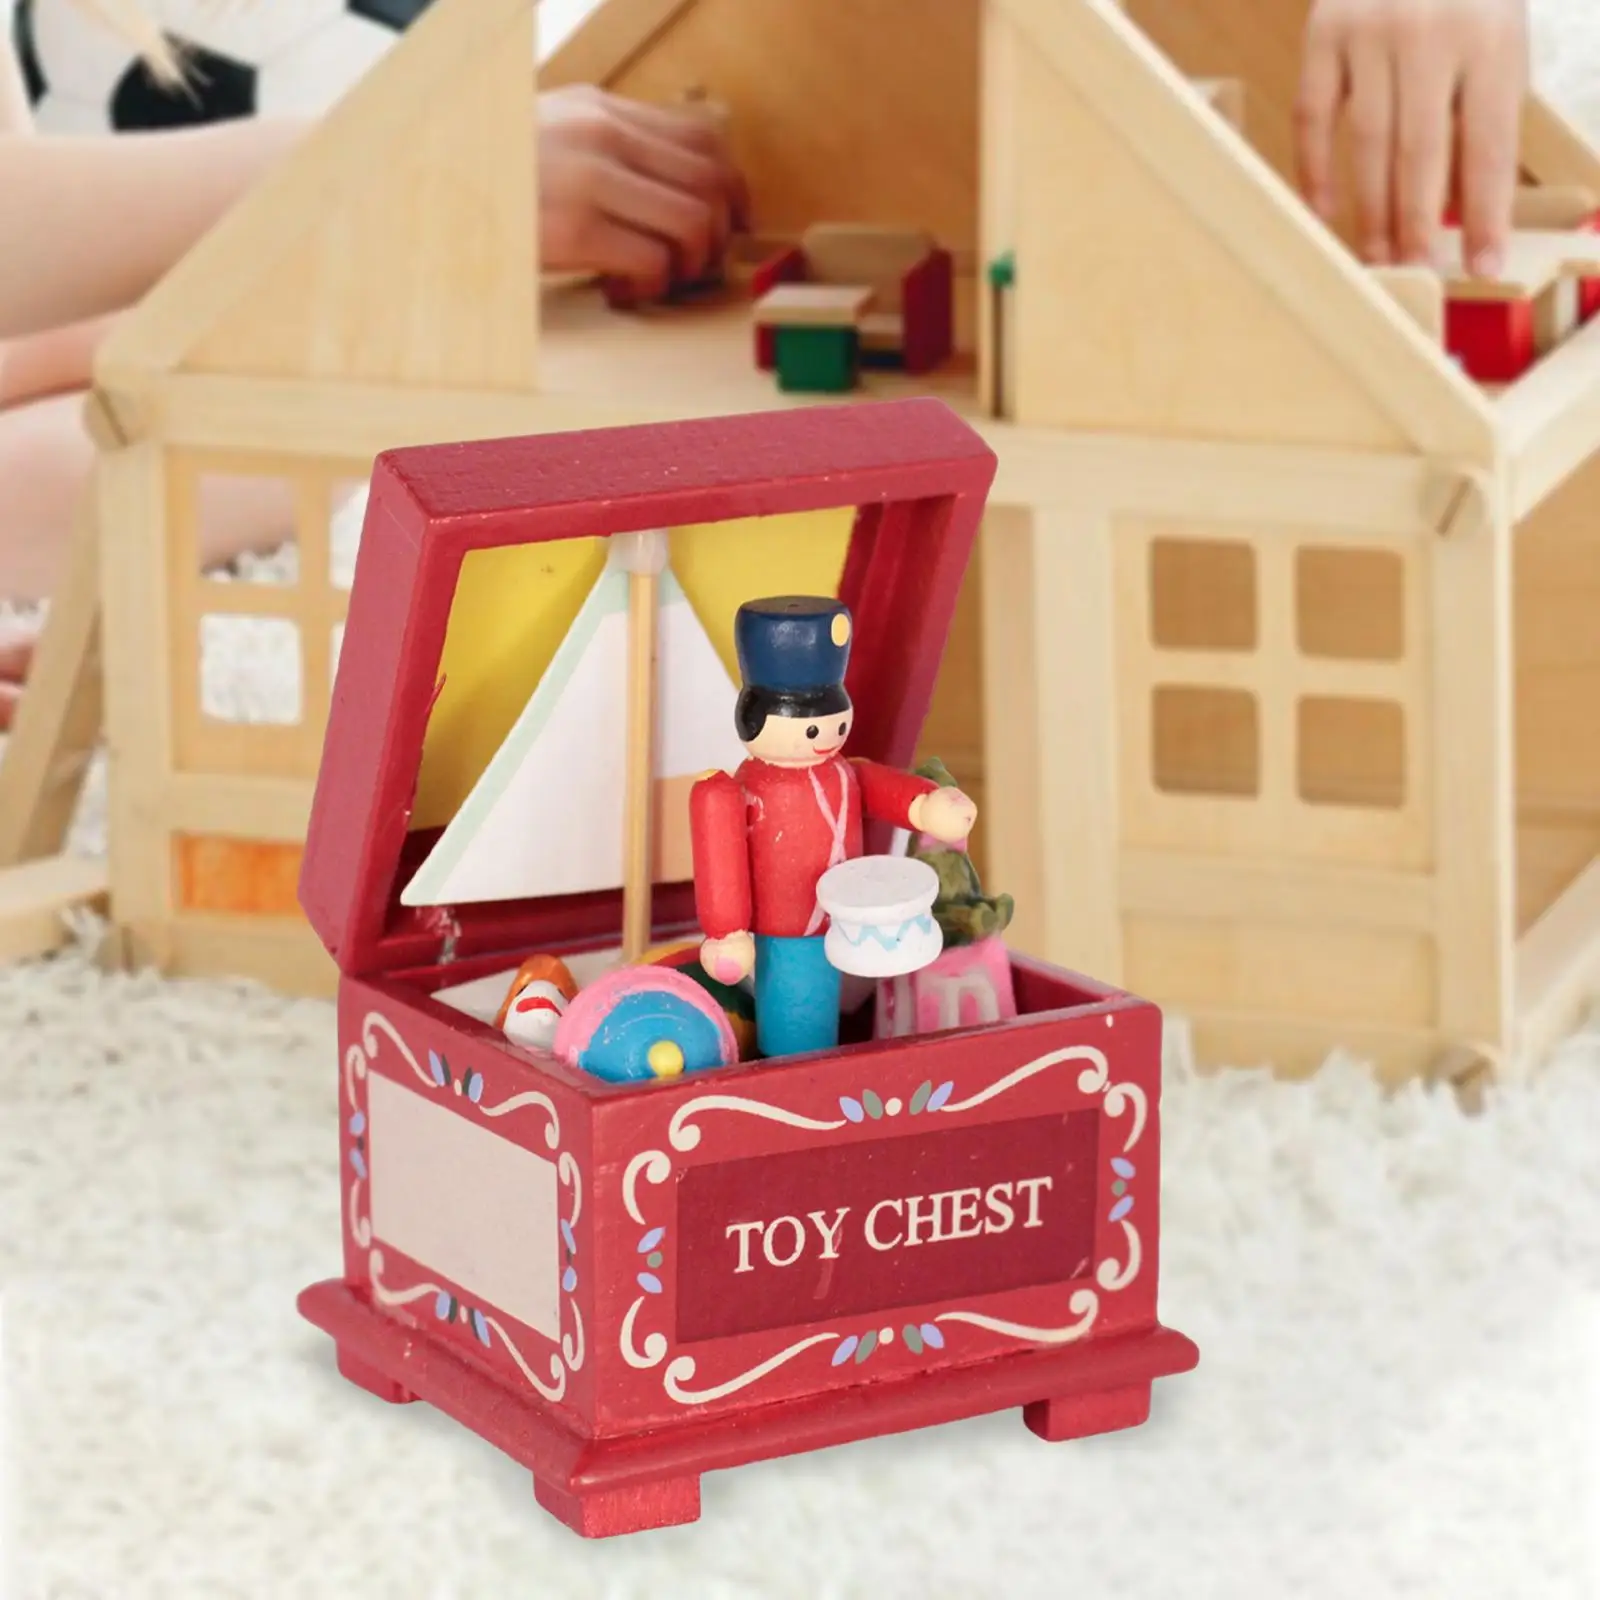 Dollhouse Toys Chest Full of Toys Old Fashioned Ornament Miniature for Dollhouse Fairy Garden DIY Projects Pretend Toy Bedroom